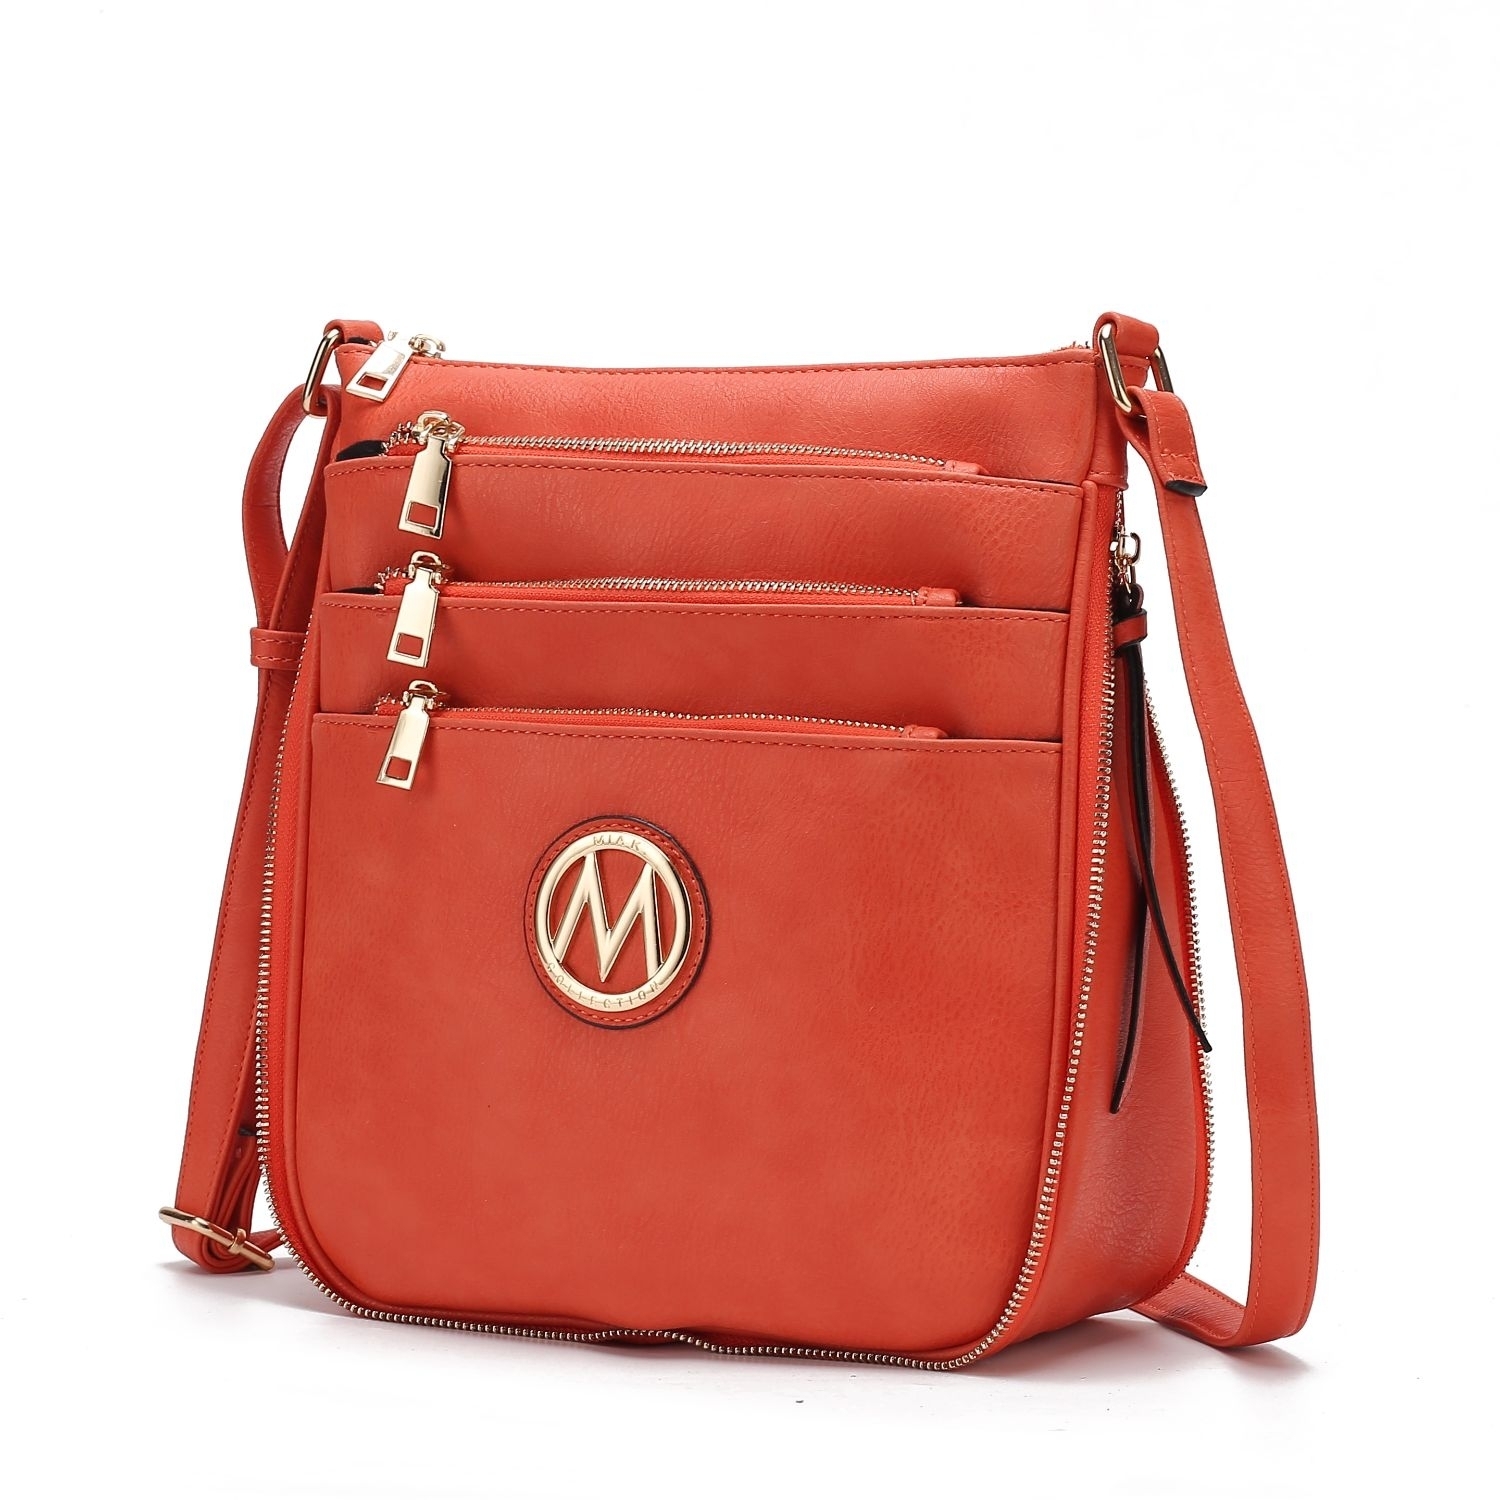 MKF Collection Salome Expandable Multi-Compartment Cross Body By Mia K. Handbag - Coral